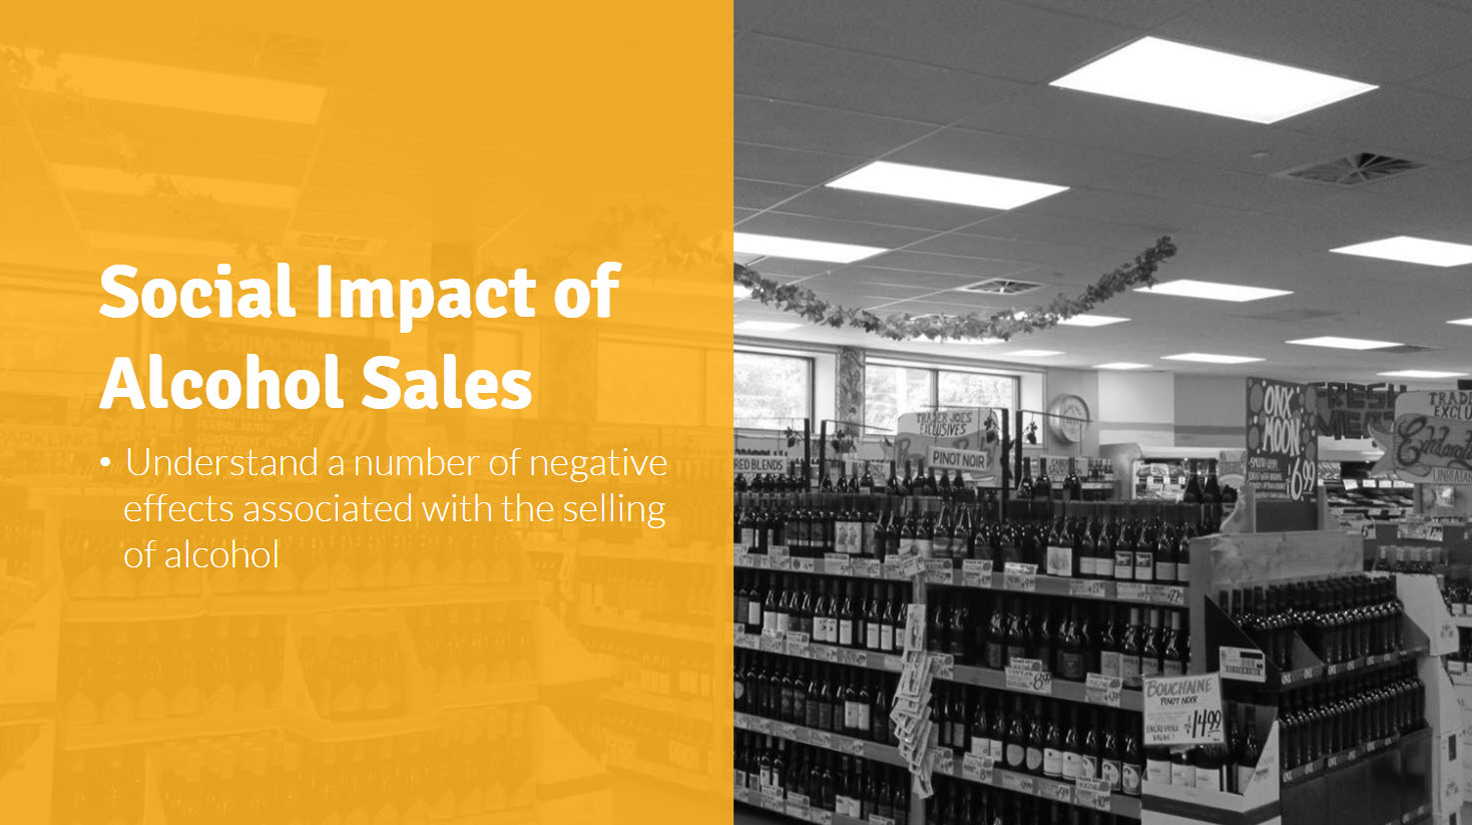 Social Impact of Alcohol Sales